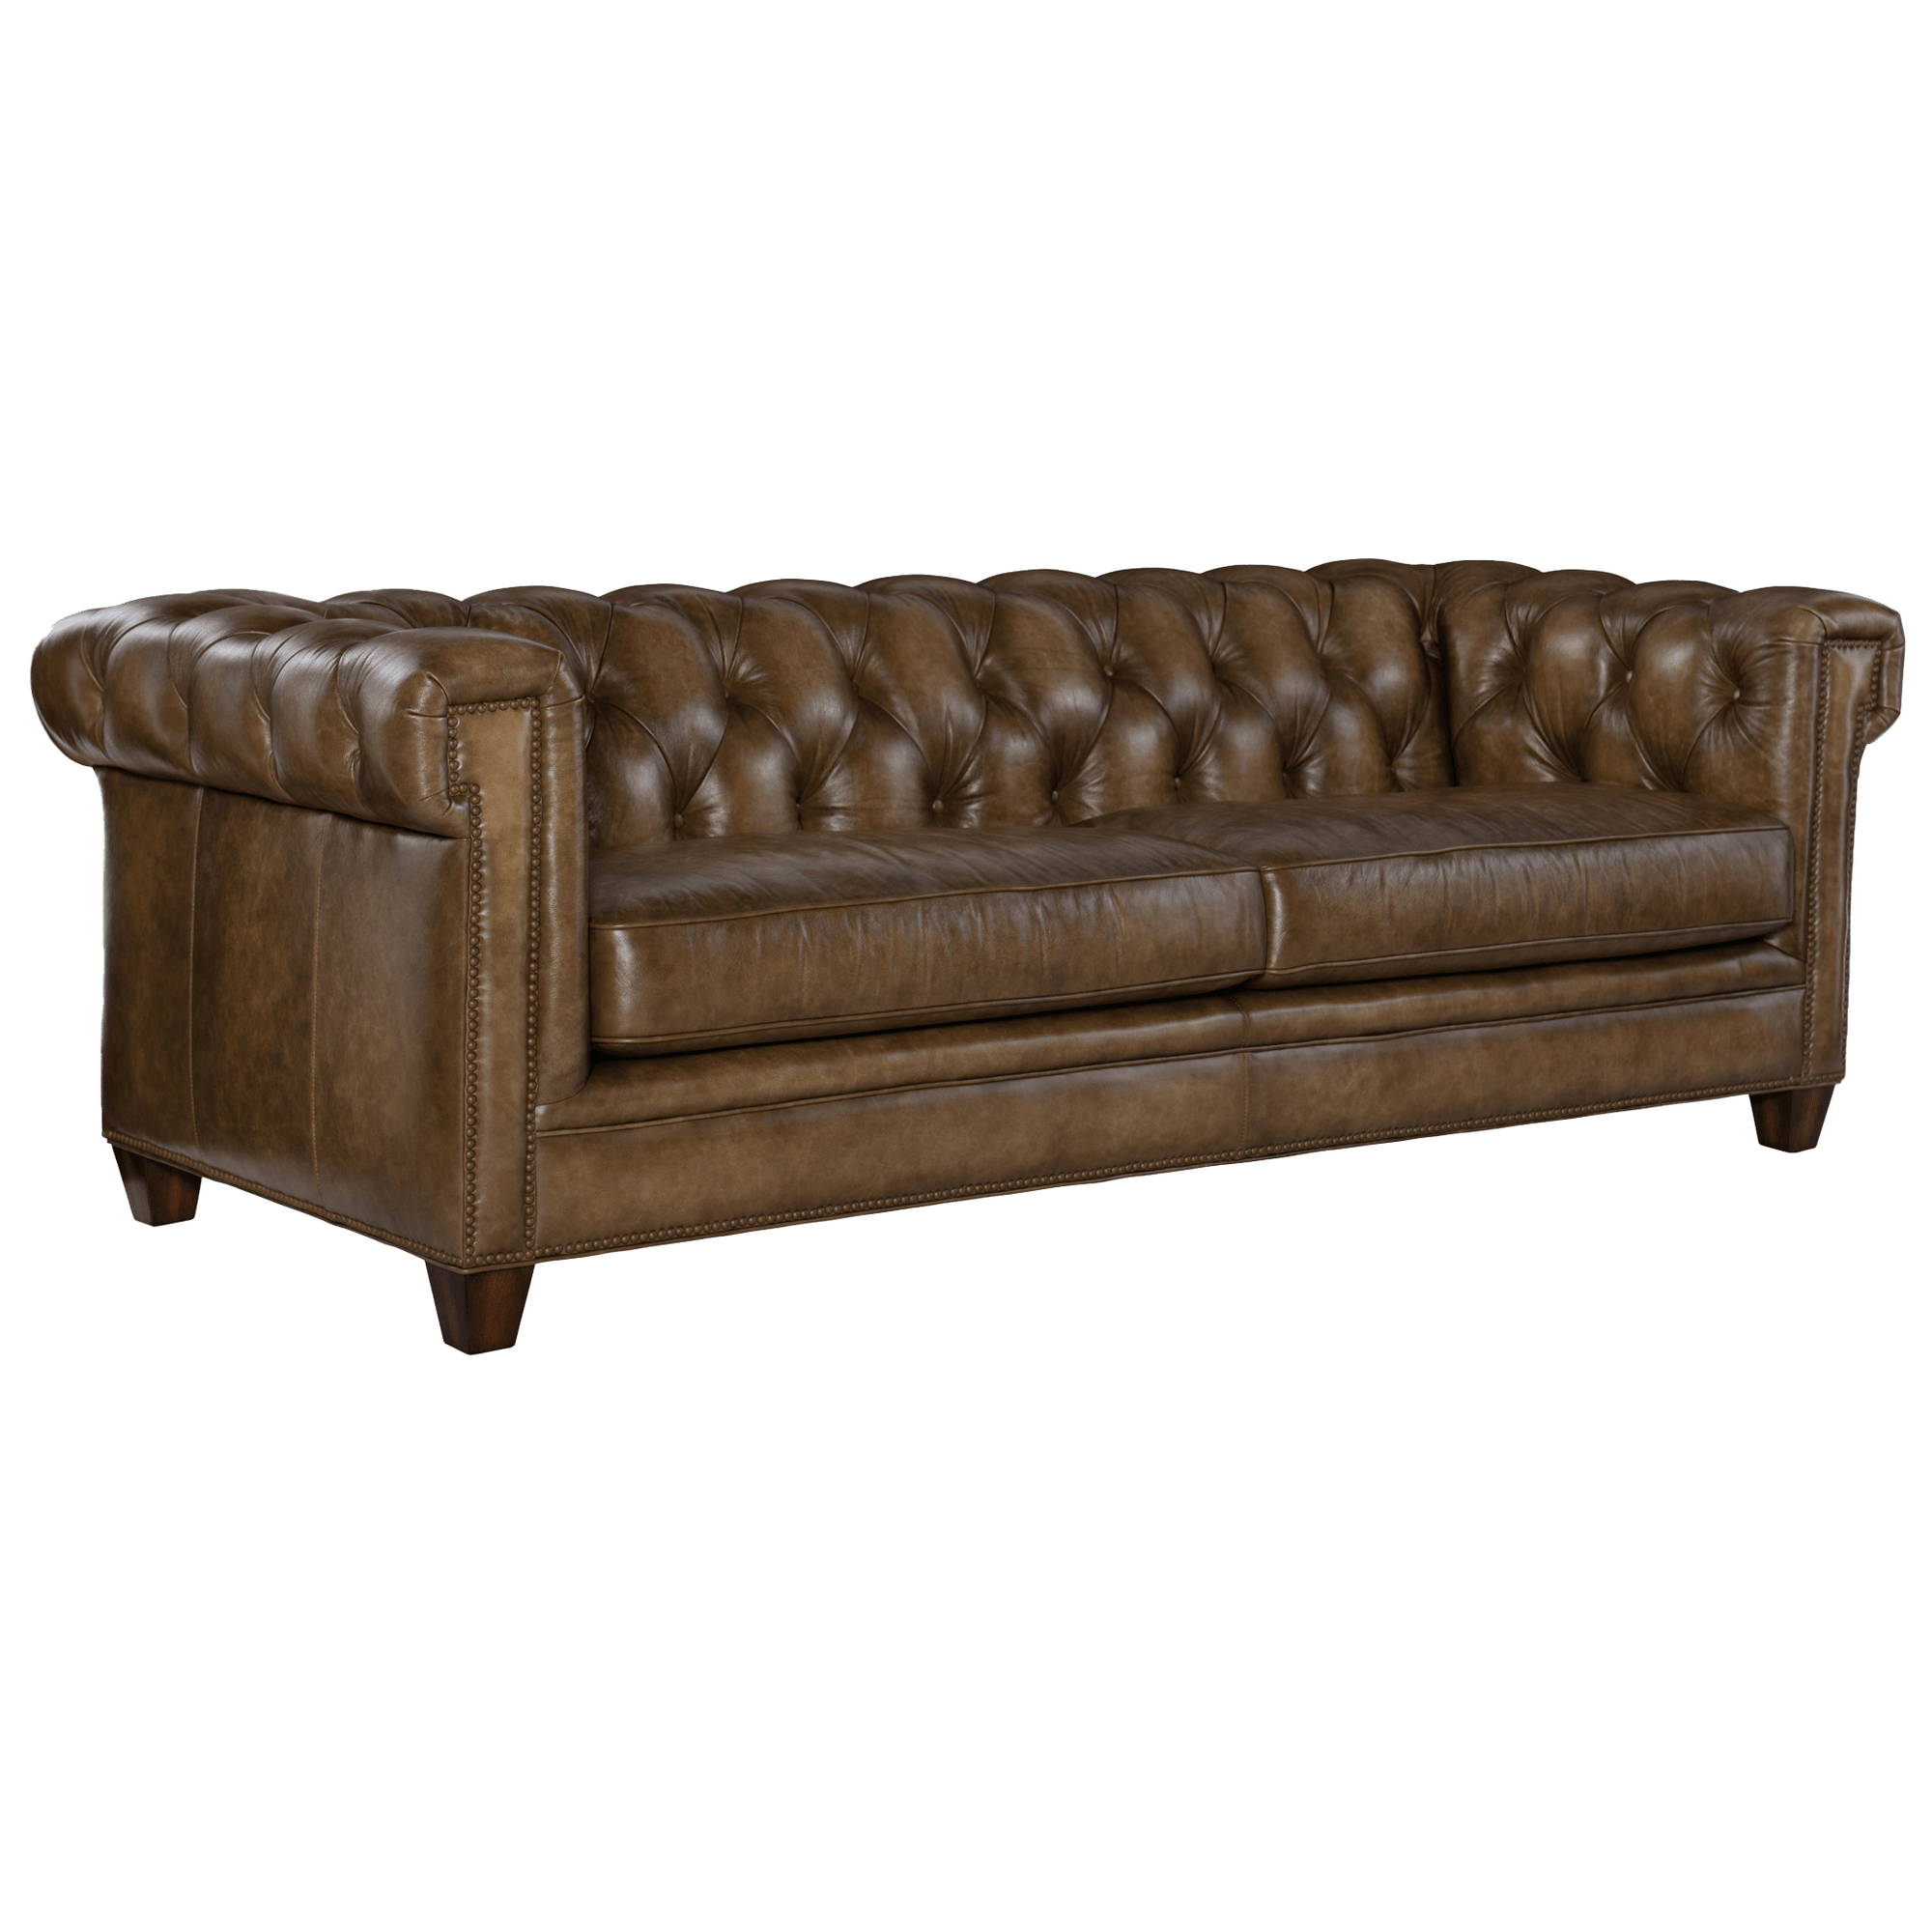 Caysie 94.5" Wide Upholstered Leather Sofa, Brown